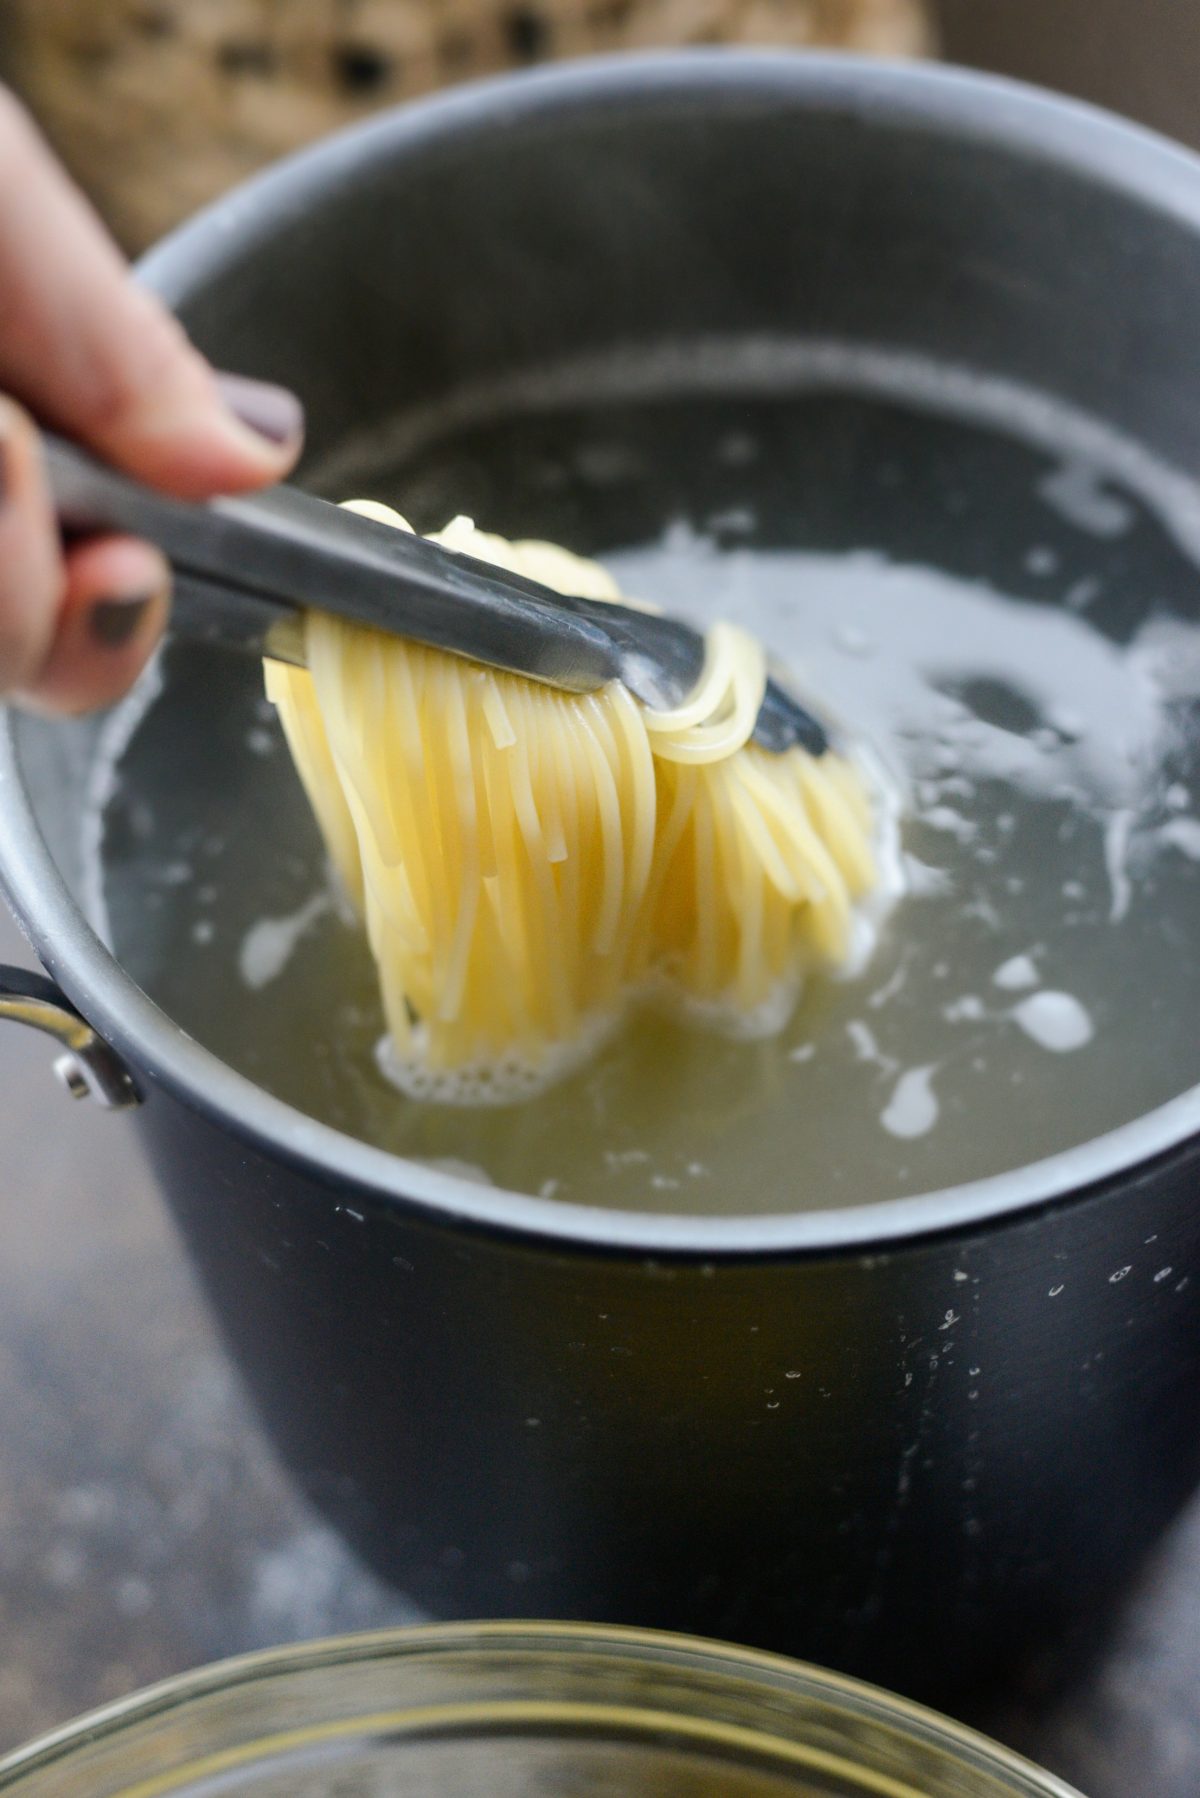 Remove hot cooked pasta from pot